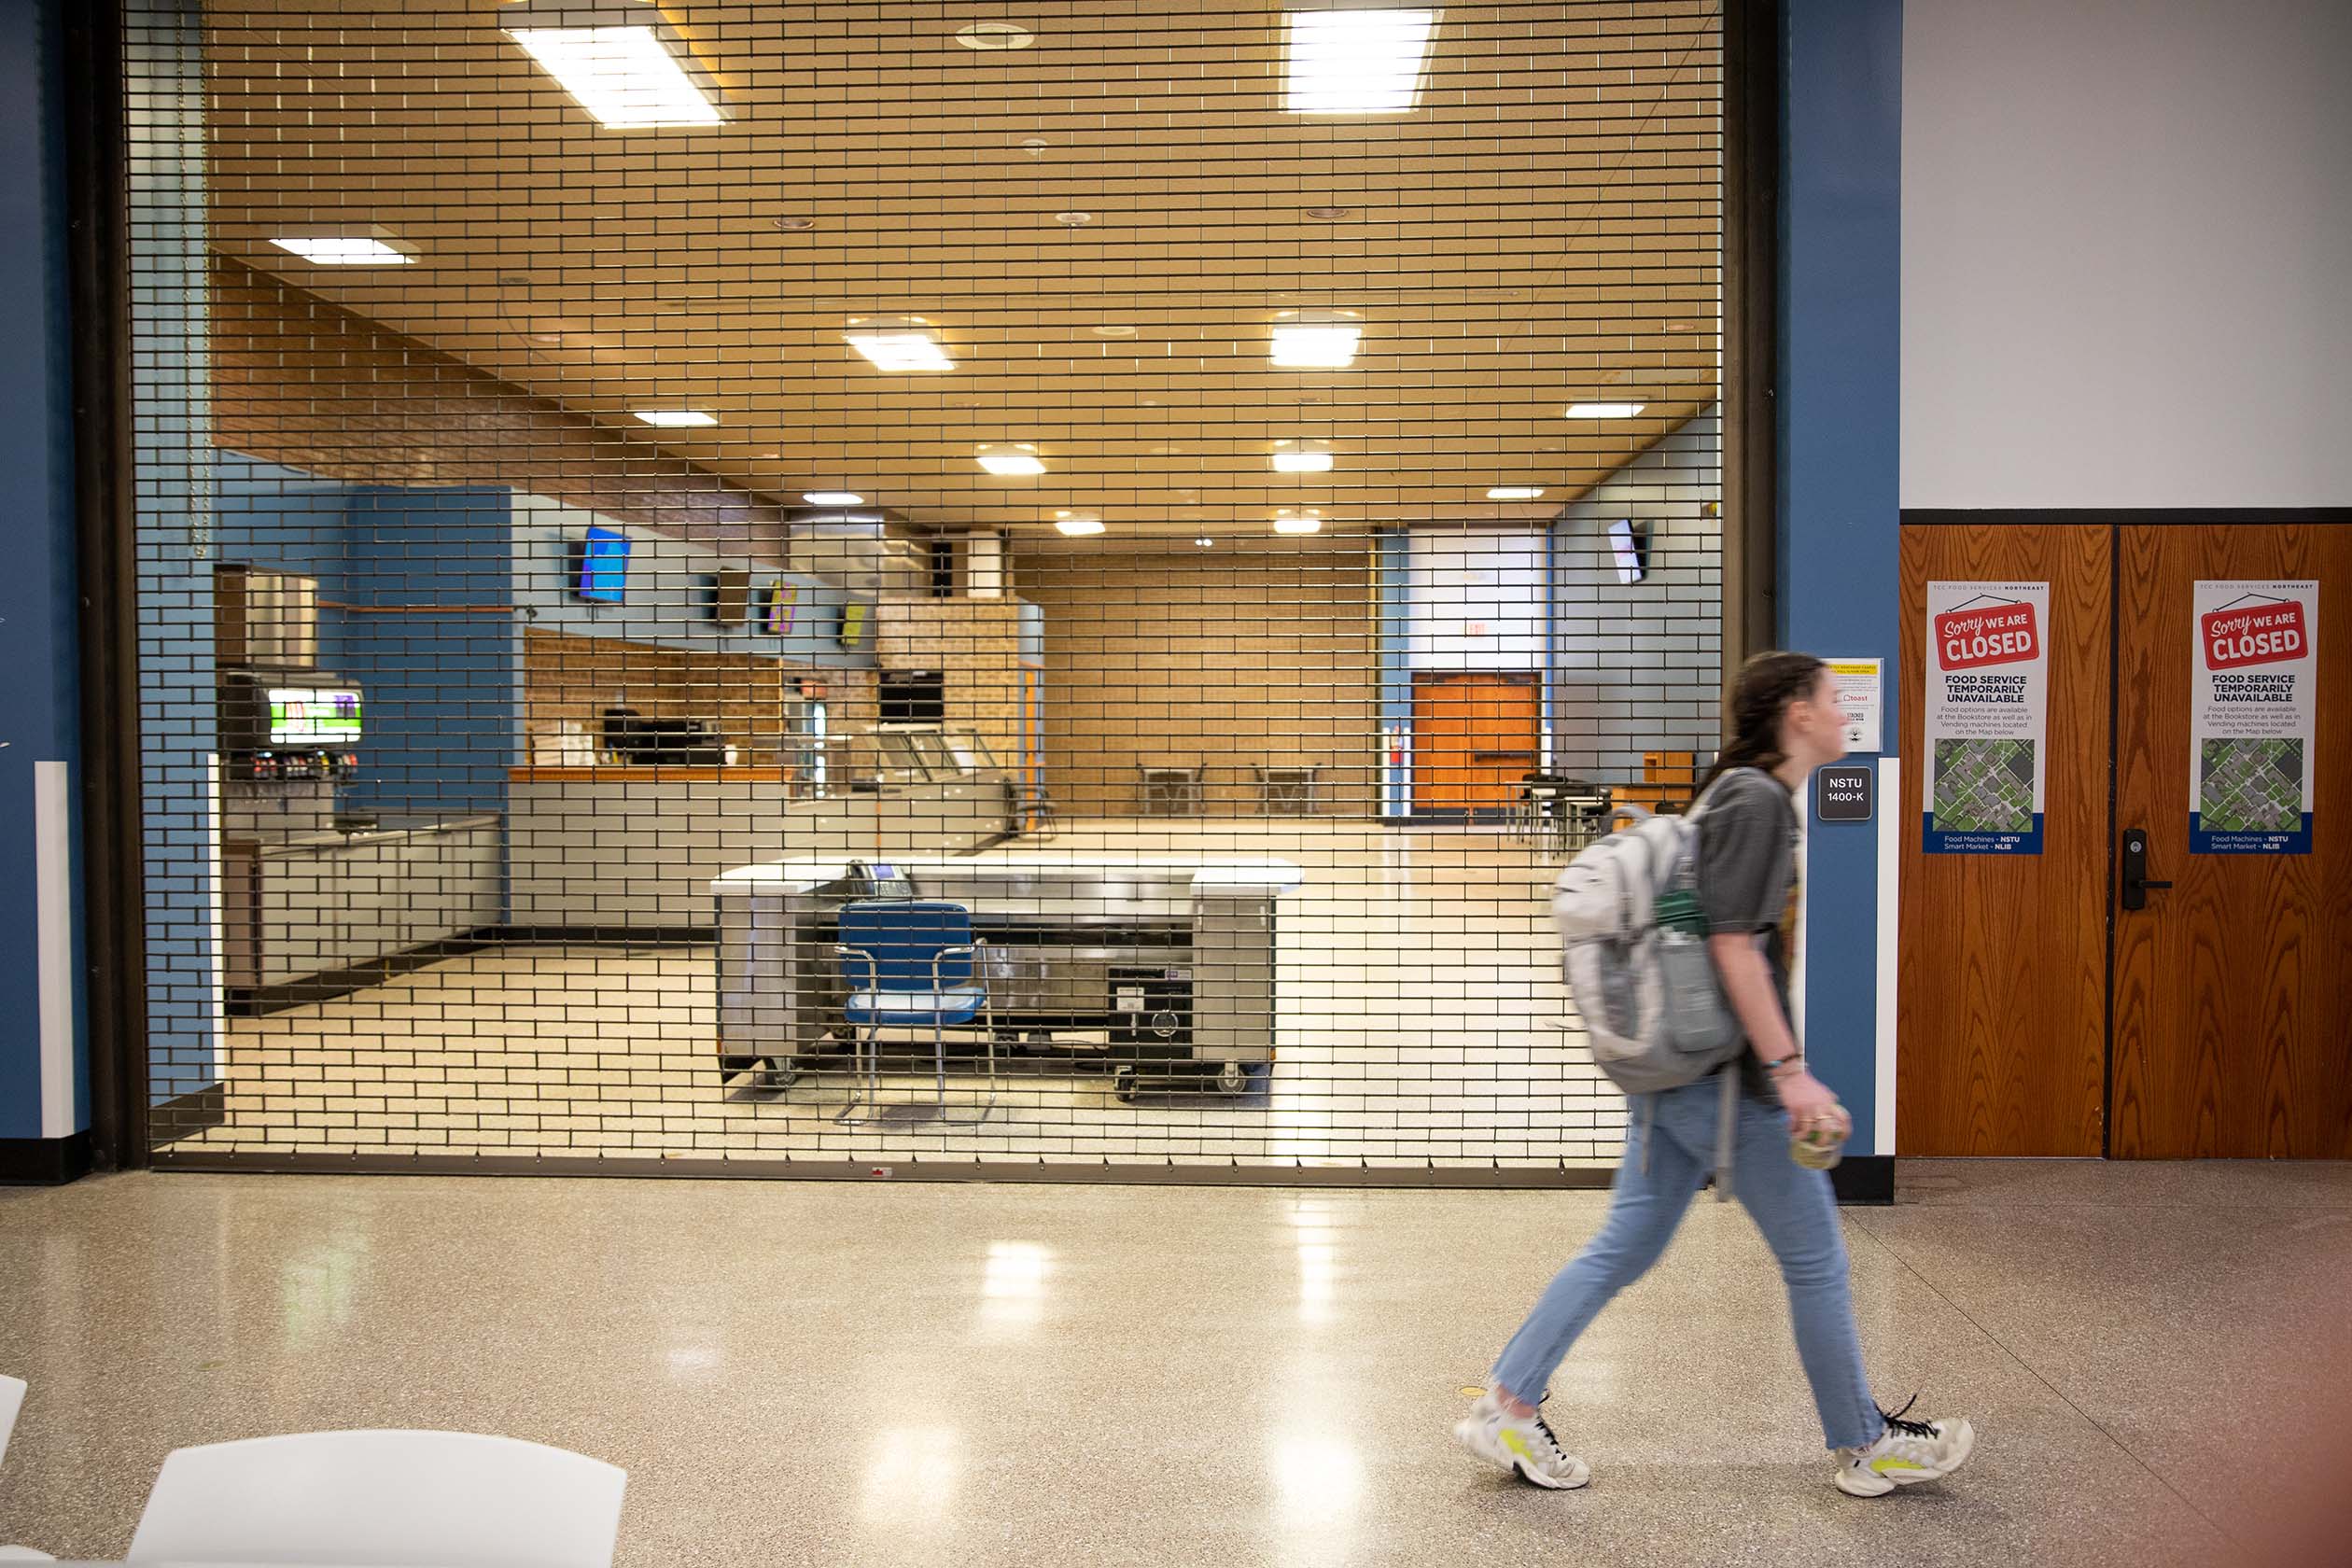 NE student Aly Jones walks by the locked up cafeteria that used to have the Genuine Food food services at NE in the NSTU building. Joel Solis/The Collegian